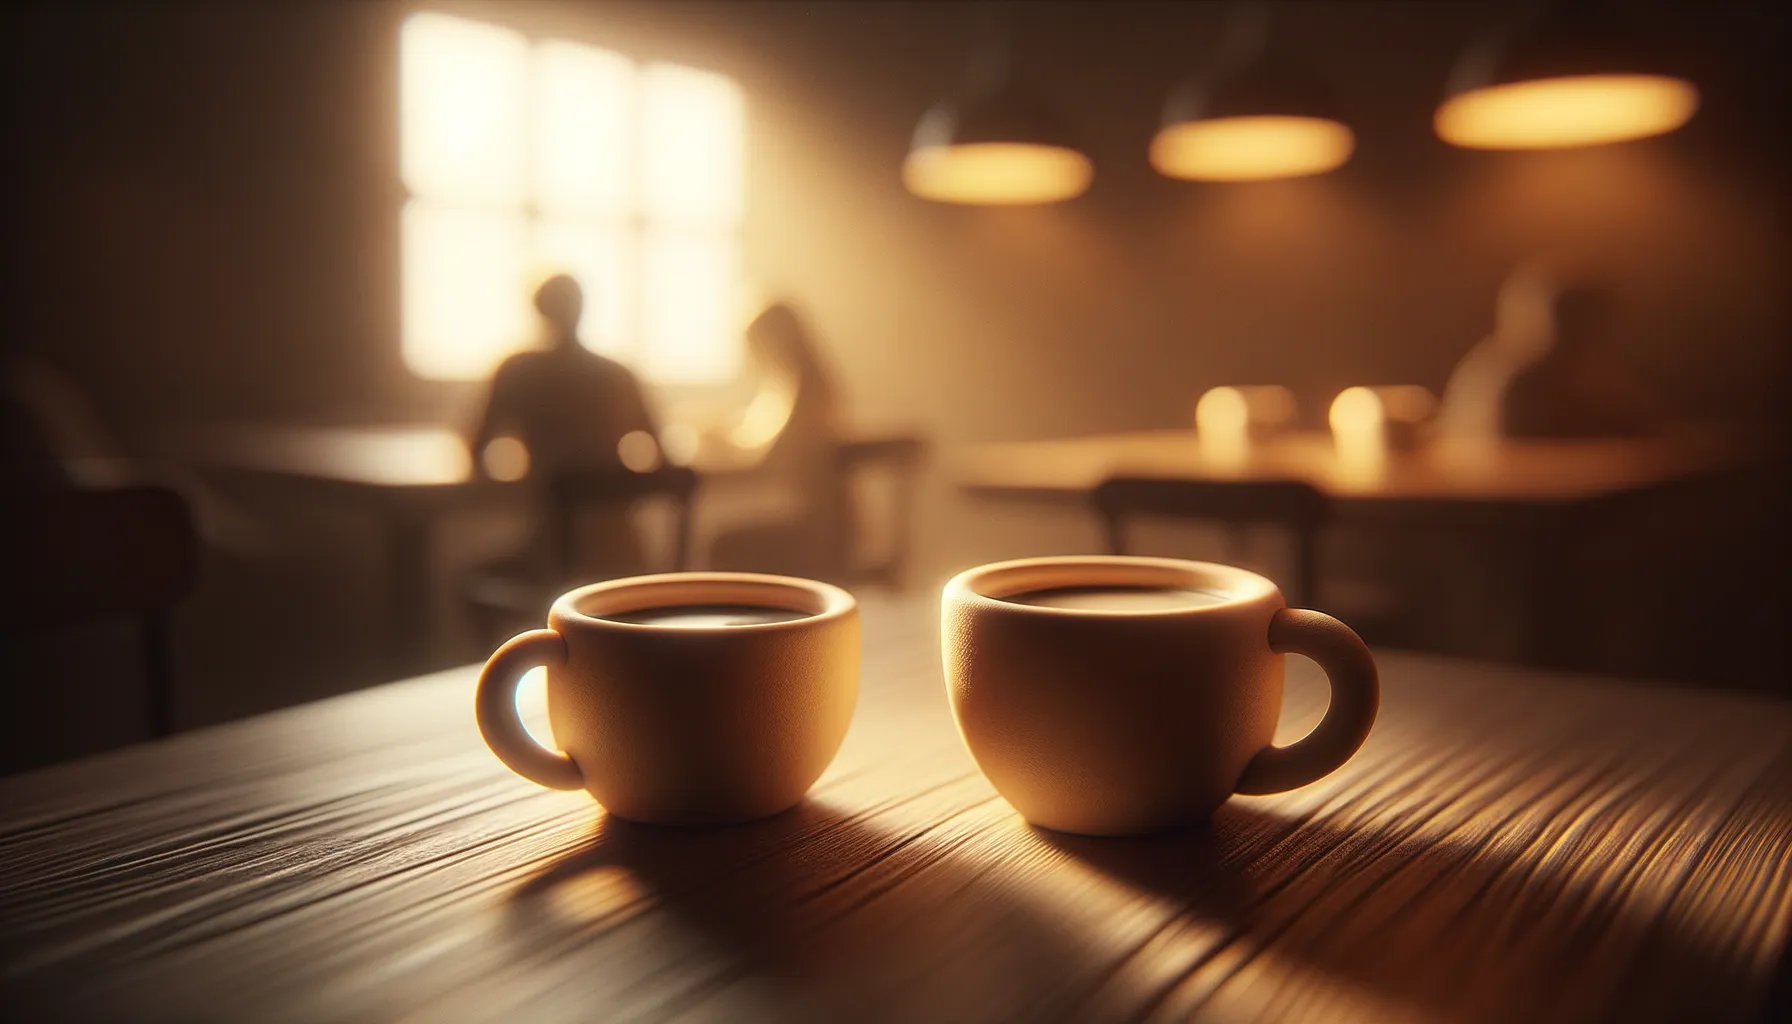 Like coffee cups on a table, our subtle gestures reach out, touching the heart with the warmth of unspoken possibilities. Discover the art of flirtation on Dating999.com.